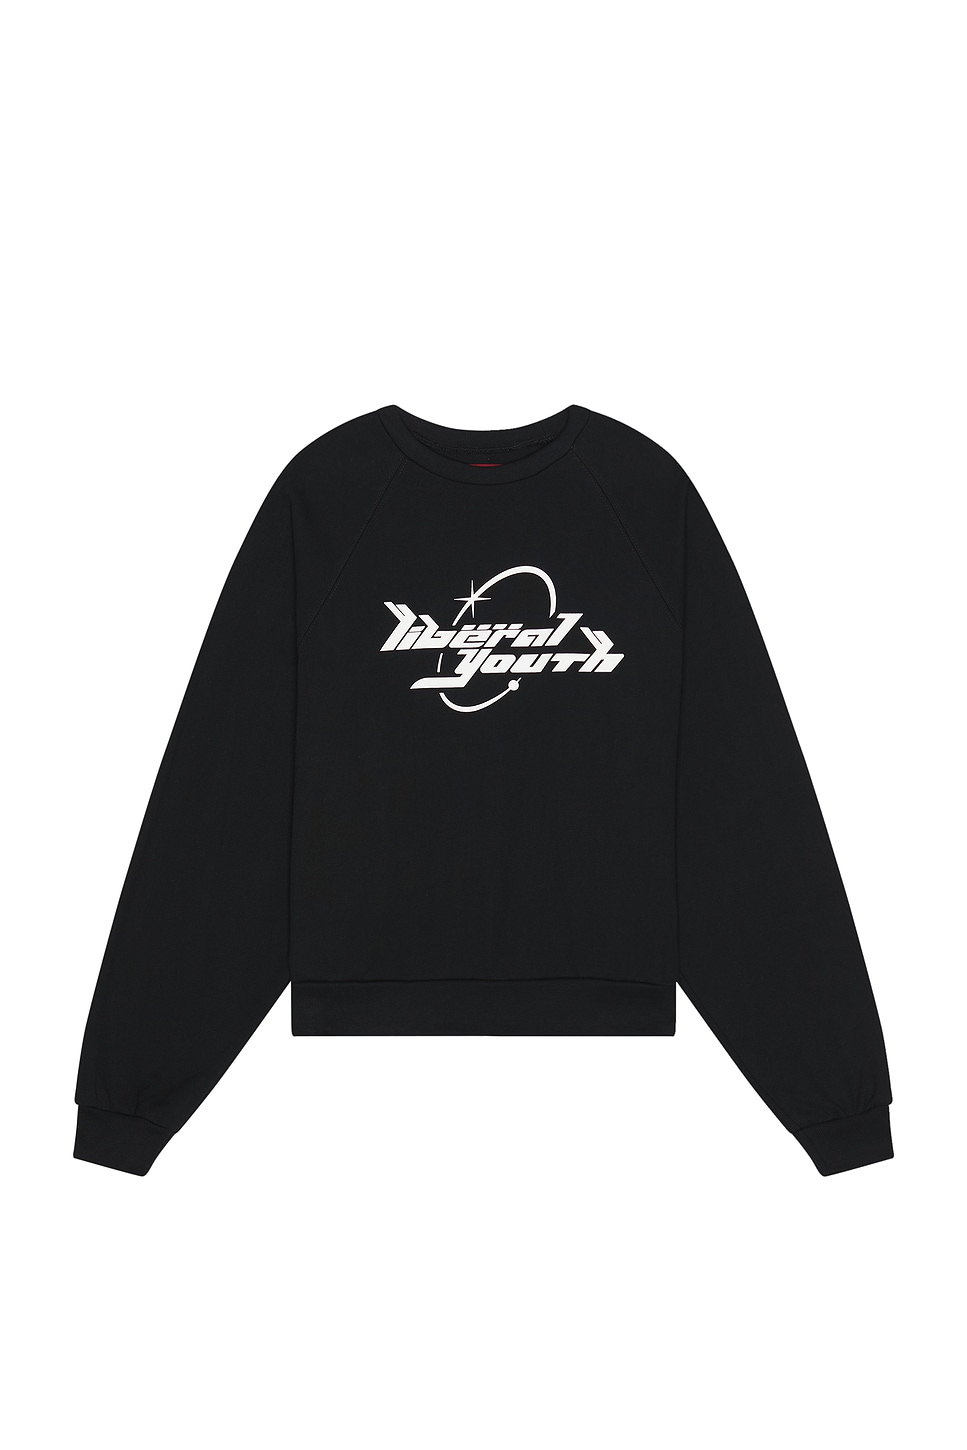 Image 1 of Liberal Youth Ministry 90s Sweatshirt Knit in Black